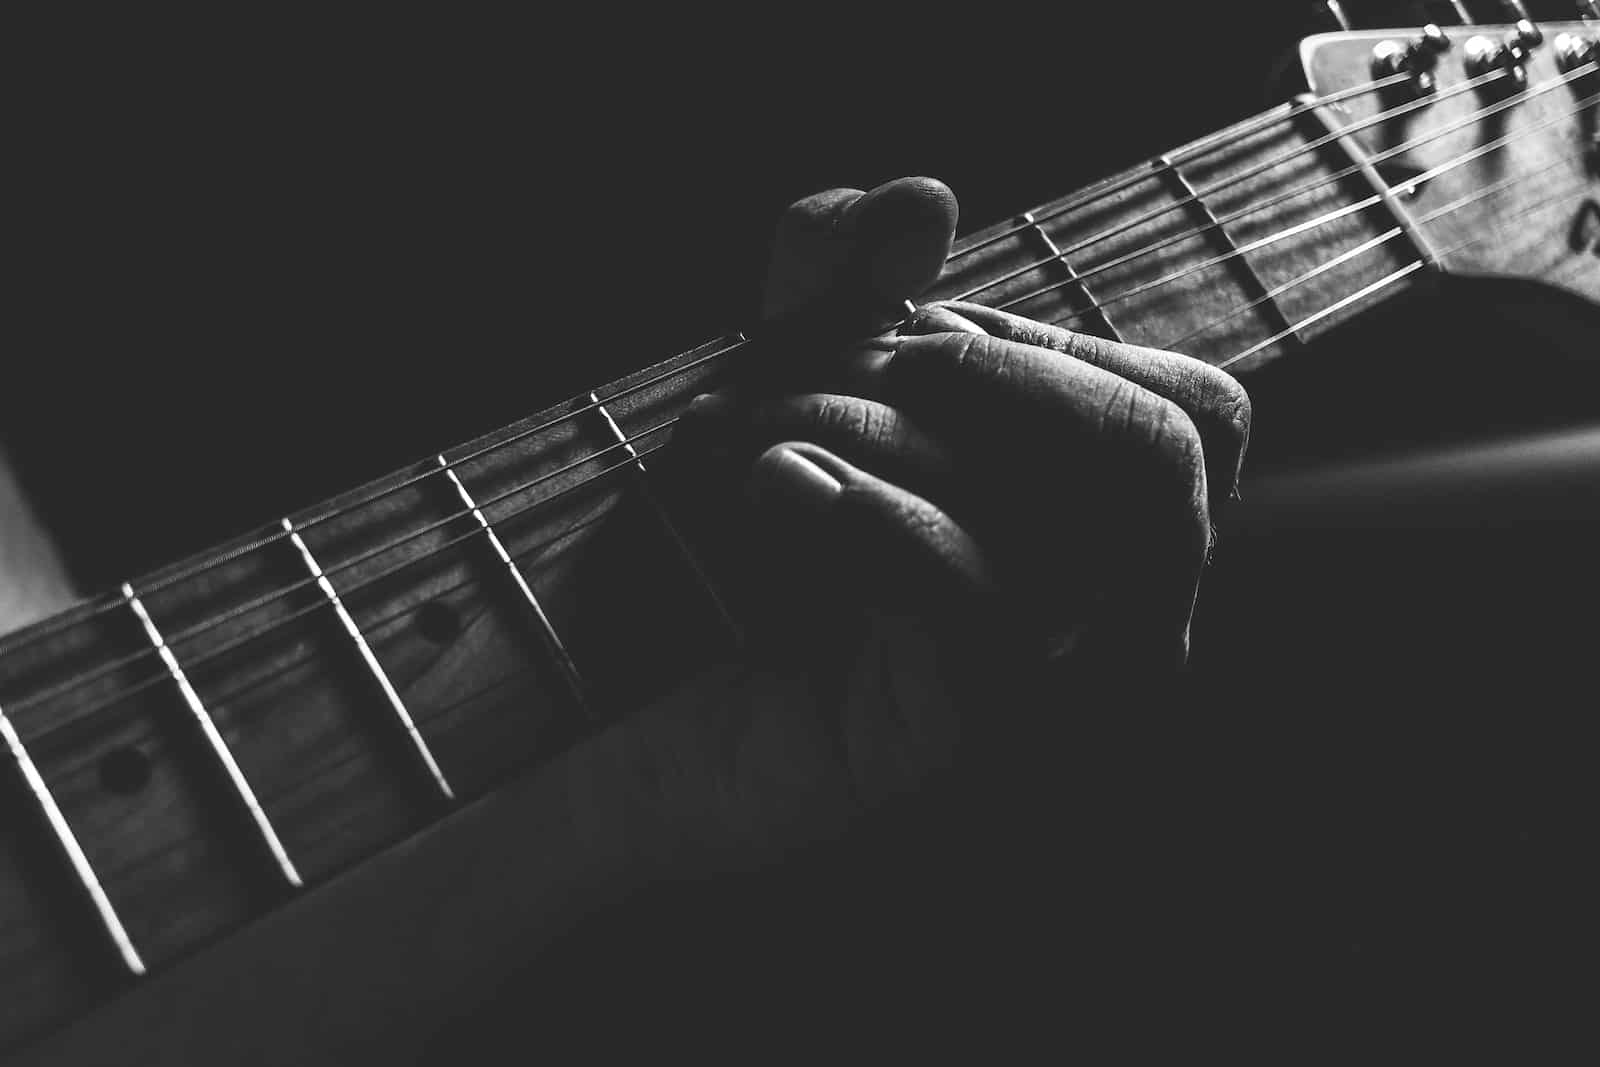 How Long Does It Take To Build Calluses From Guitar?